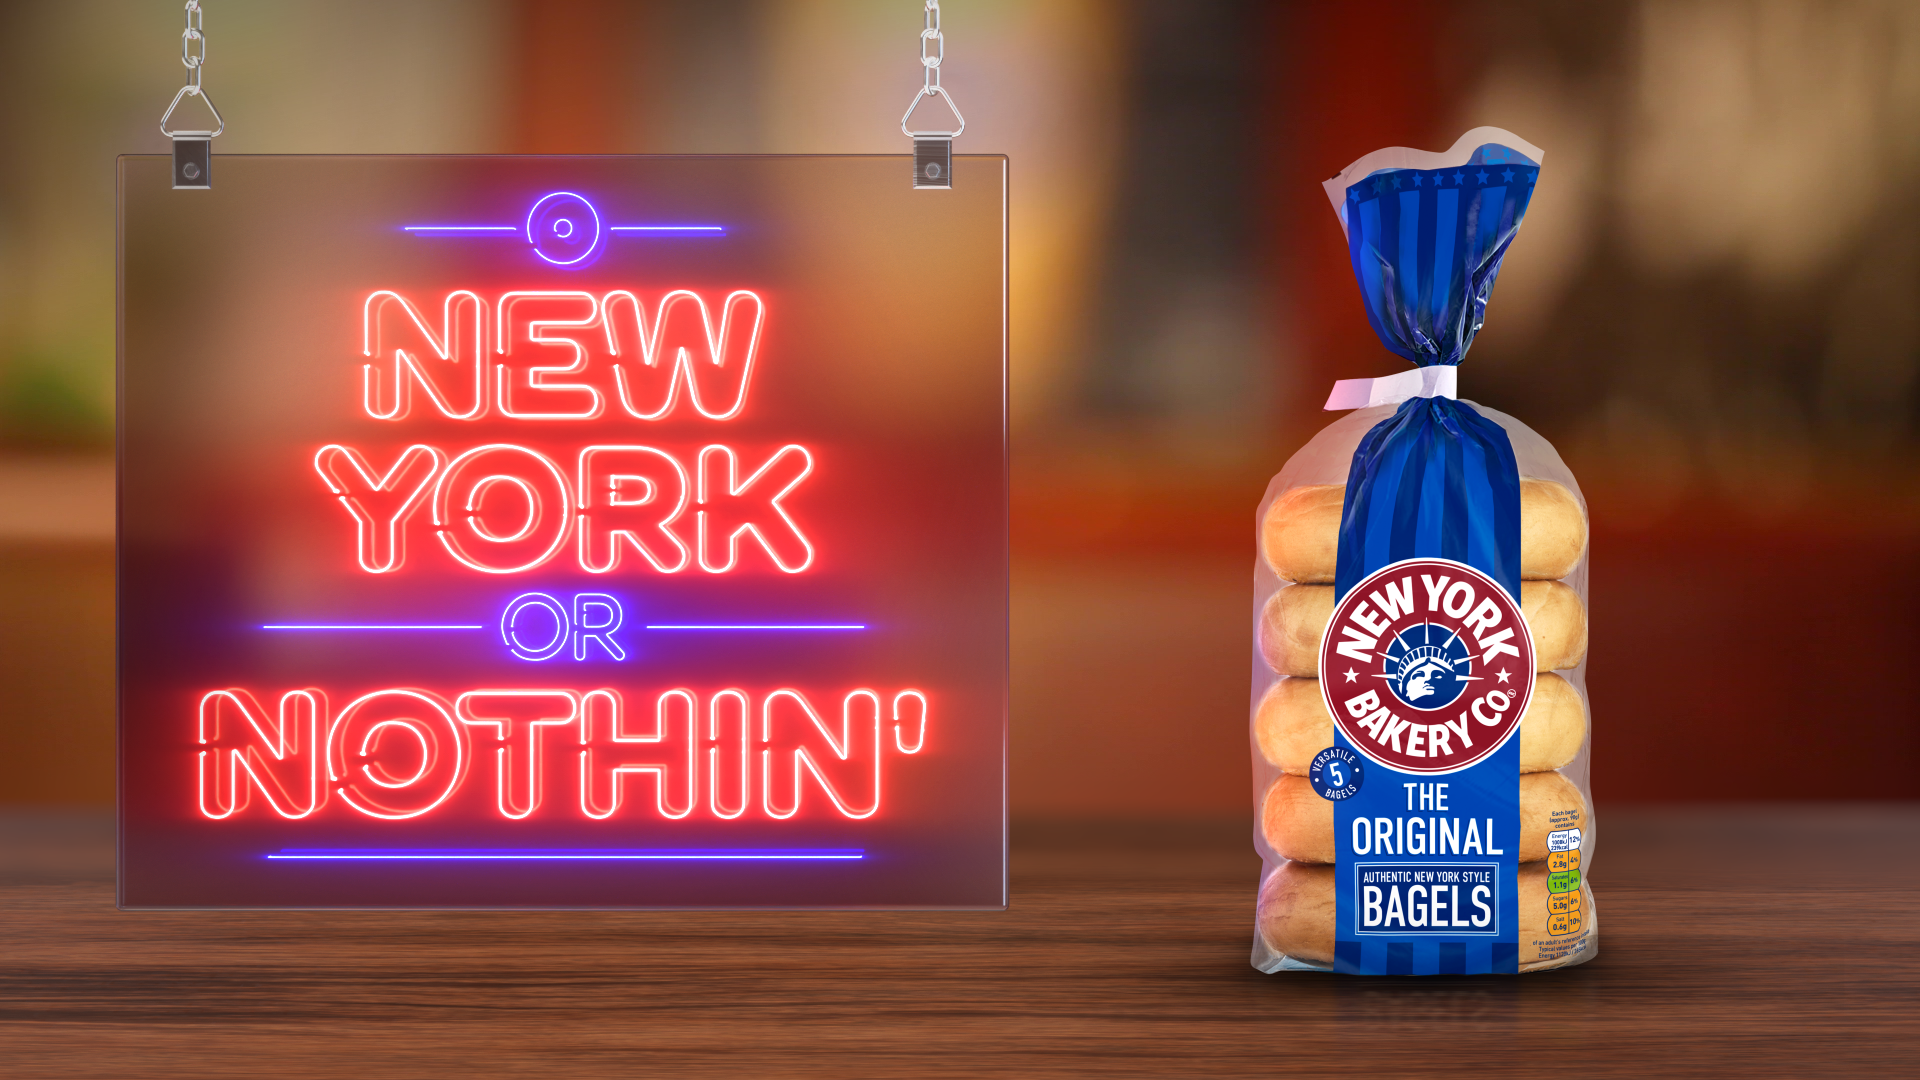 New York Bakery Co. launches ‘New York or Nothin’ ad campaign